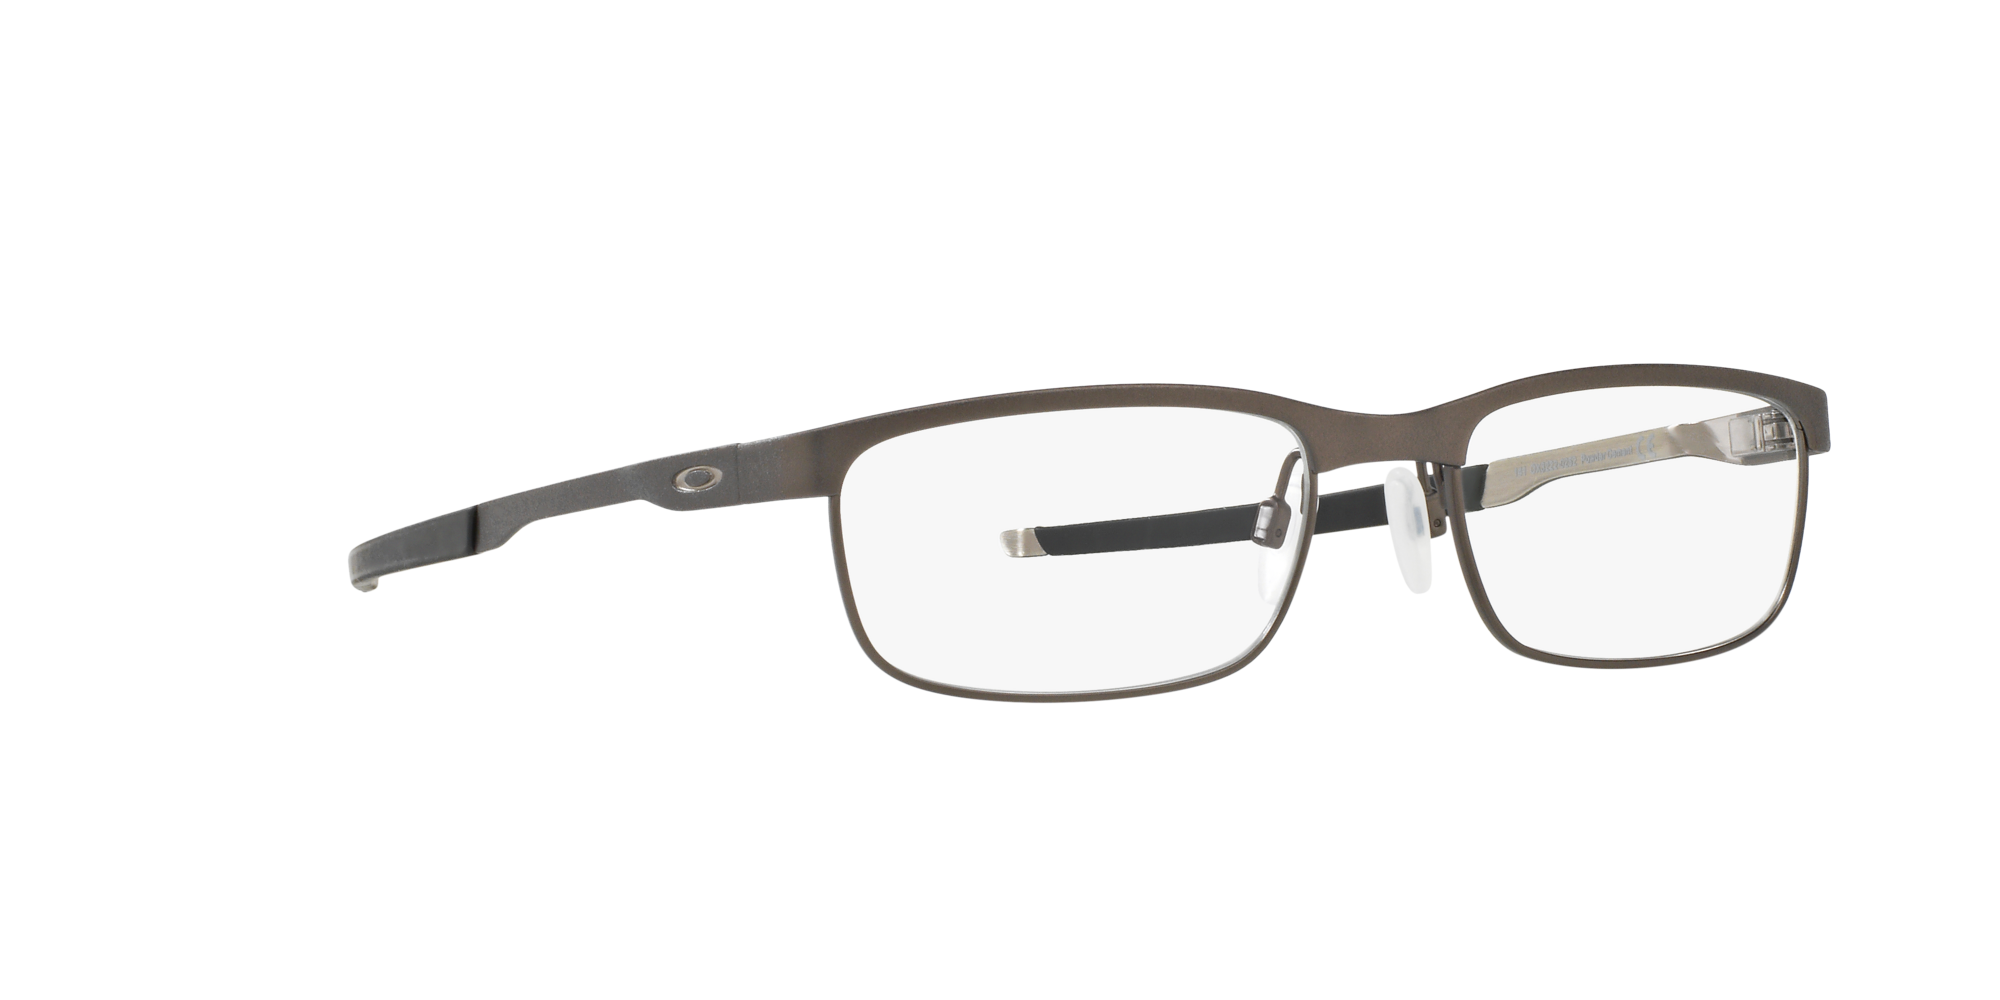 Angle_Right01 Oakley OX 3222 Glasses Transparent / Blue